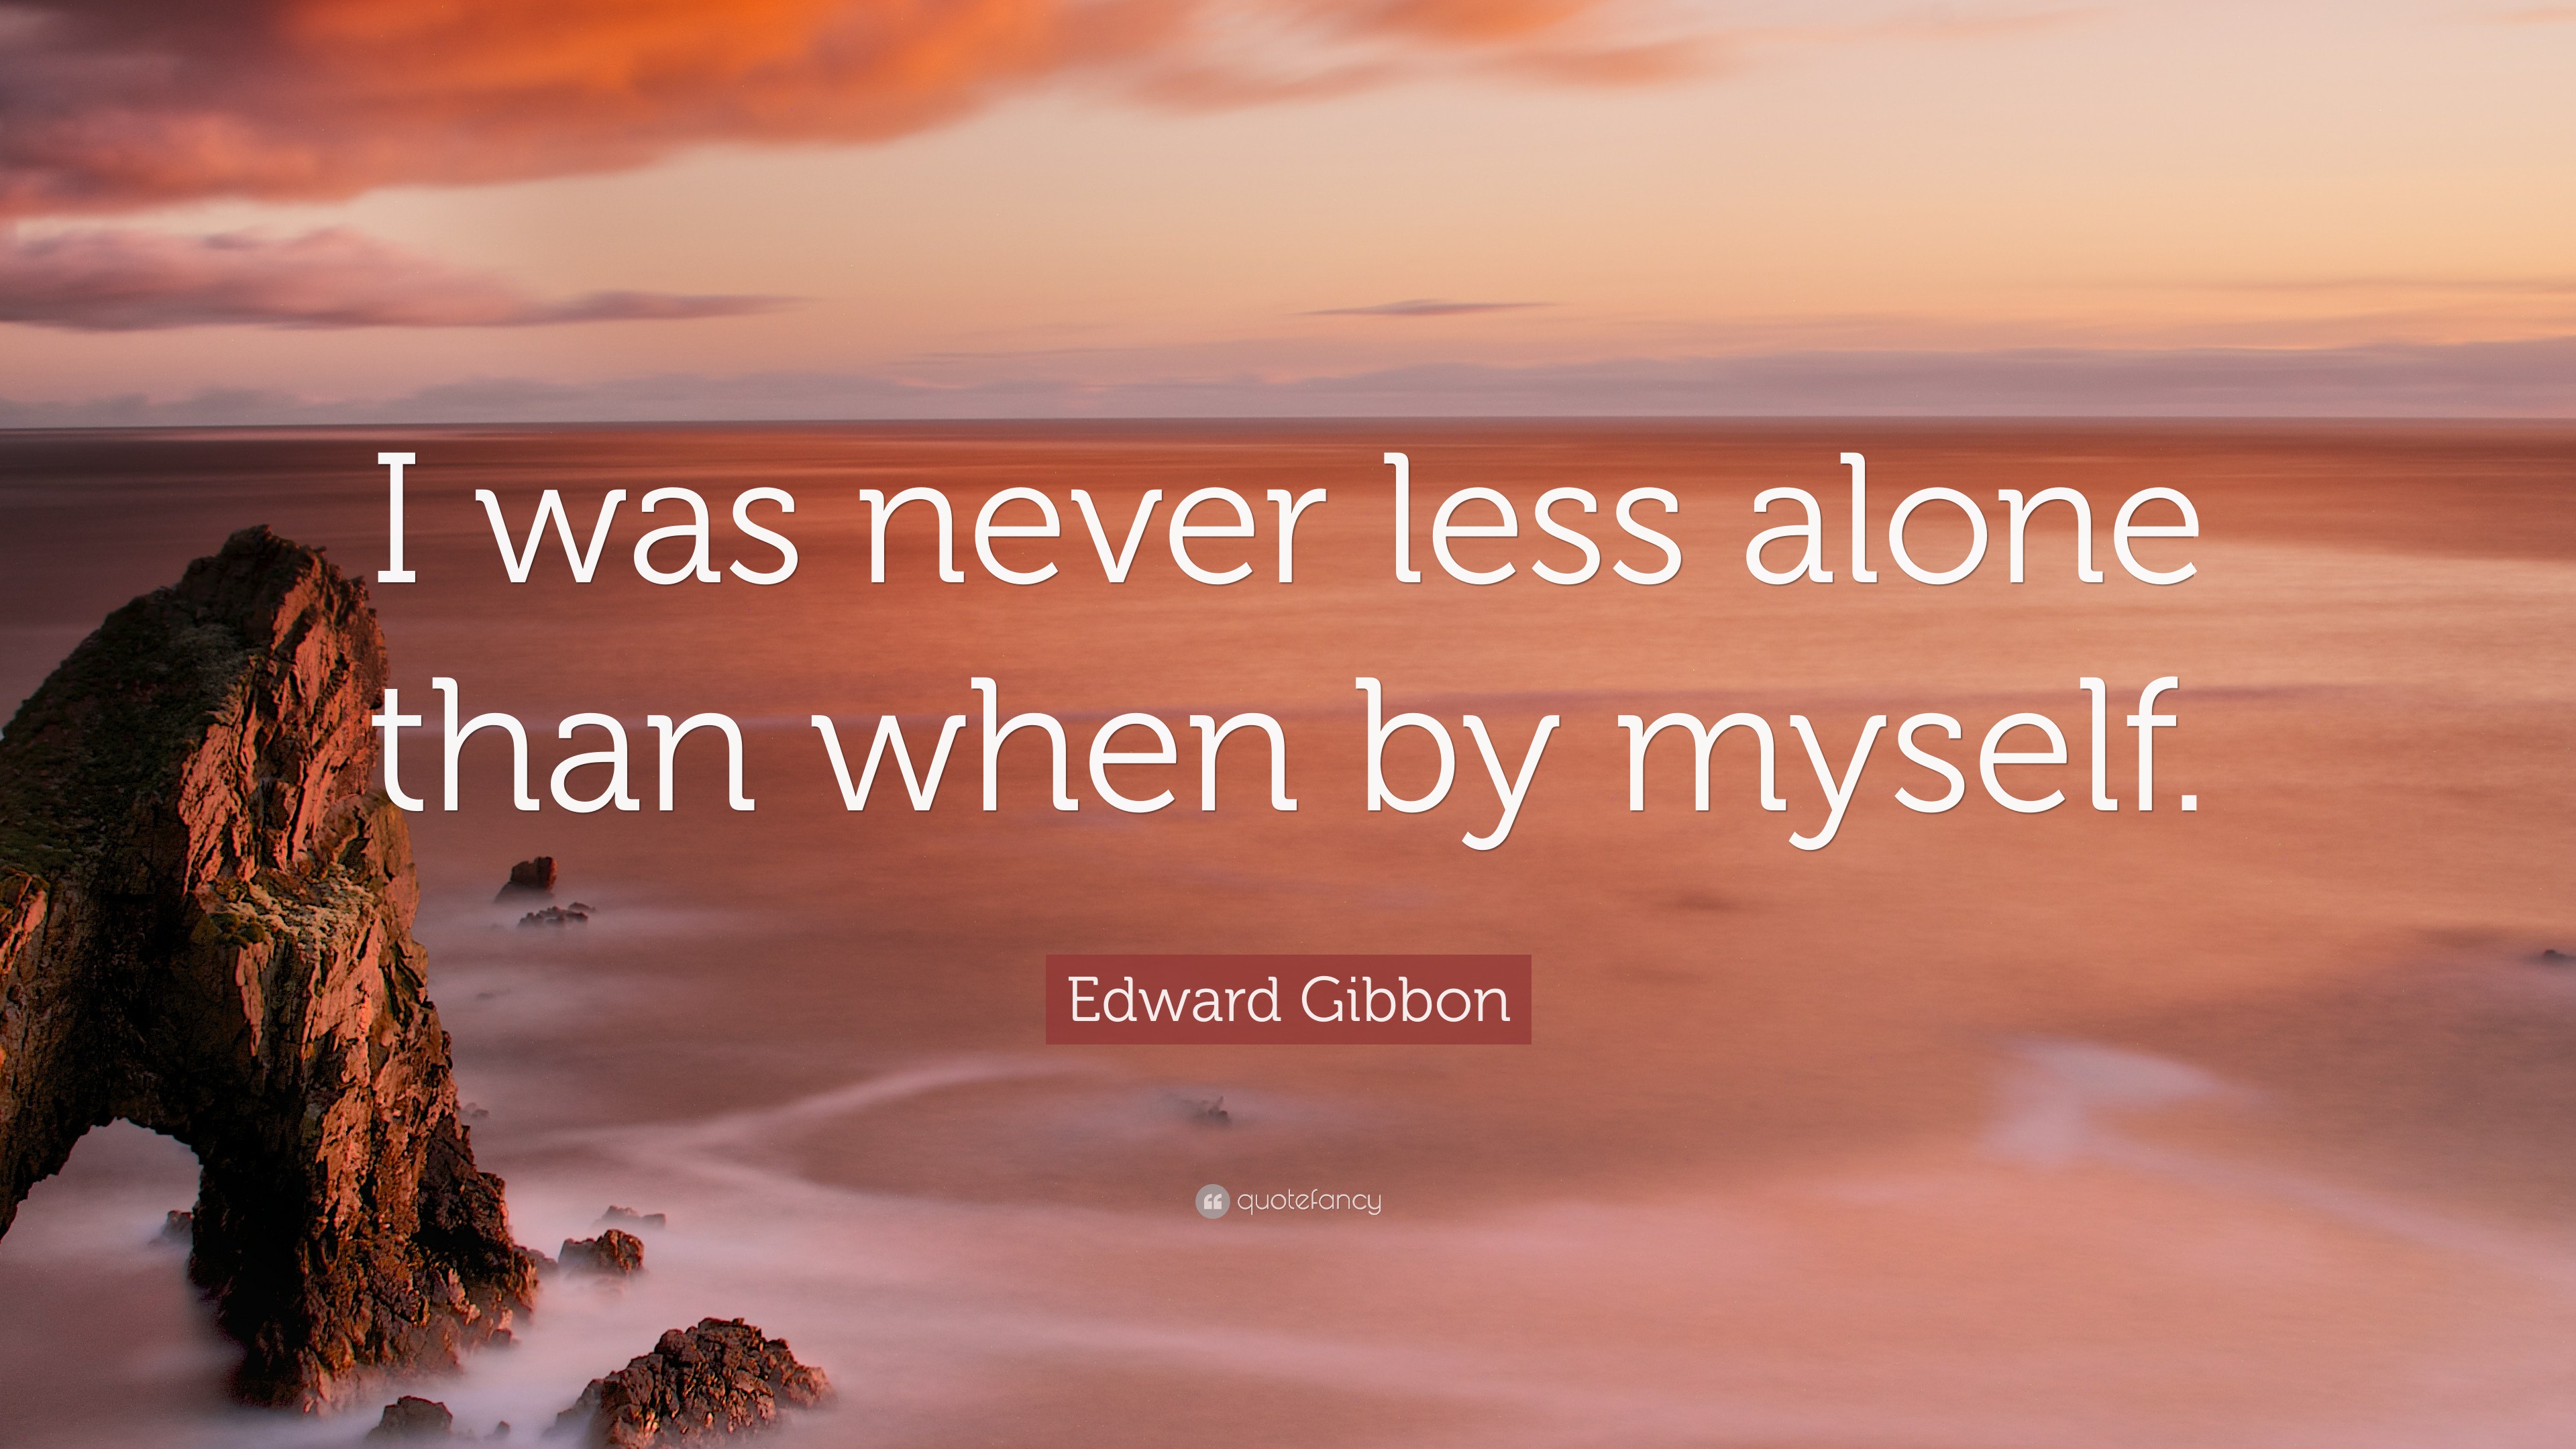 Edward Gibbon Quote: “I was never less alone than when by myself.”